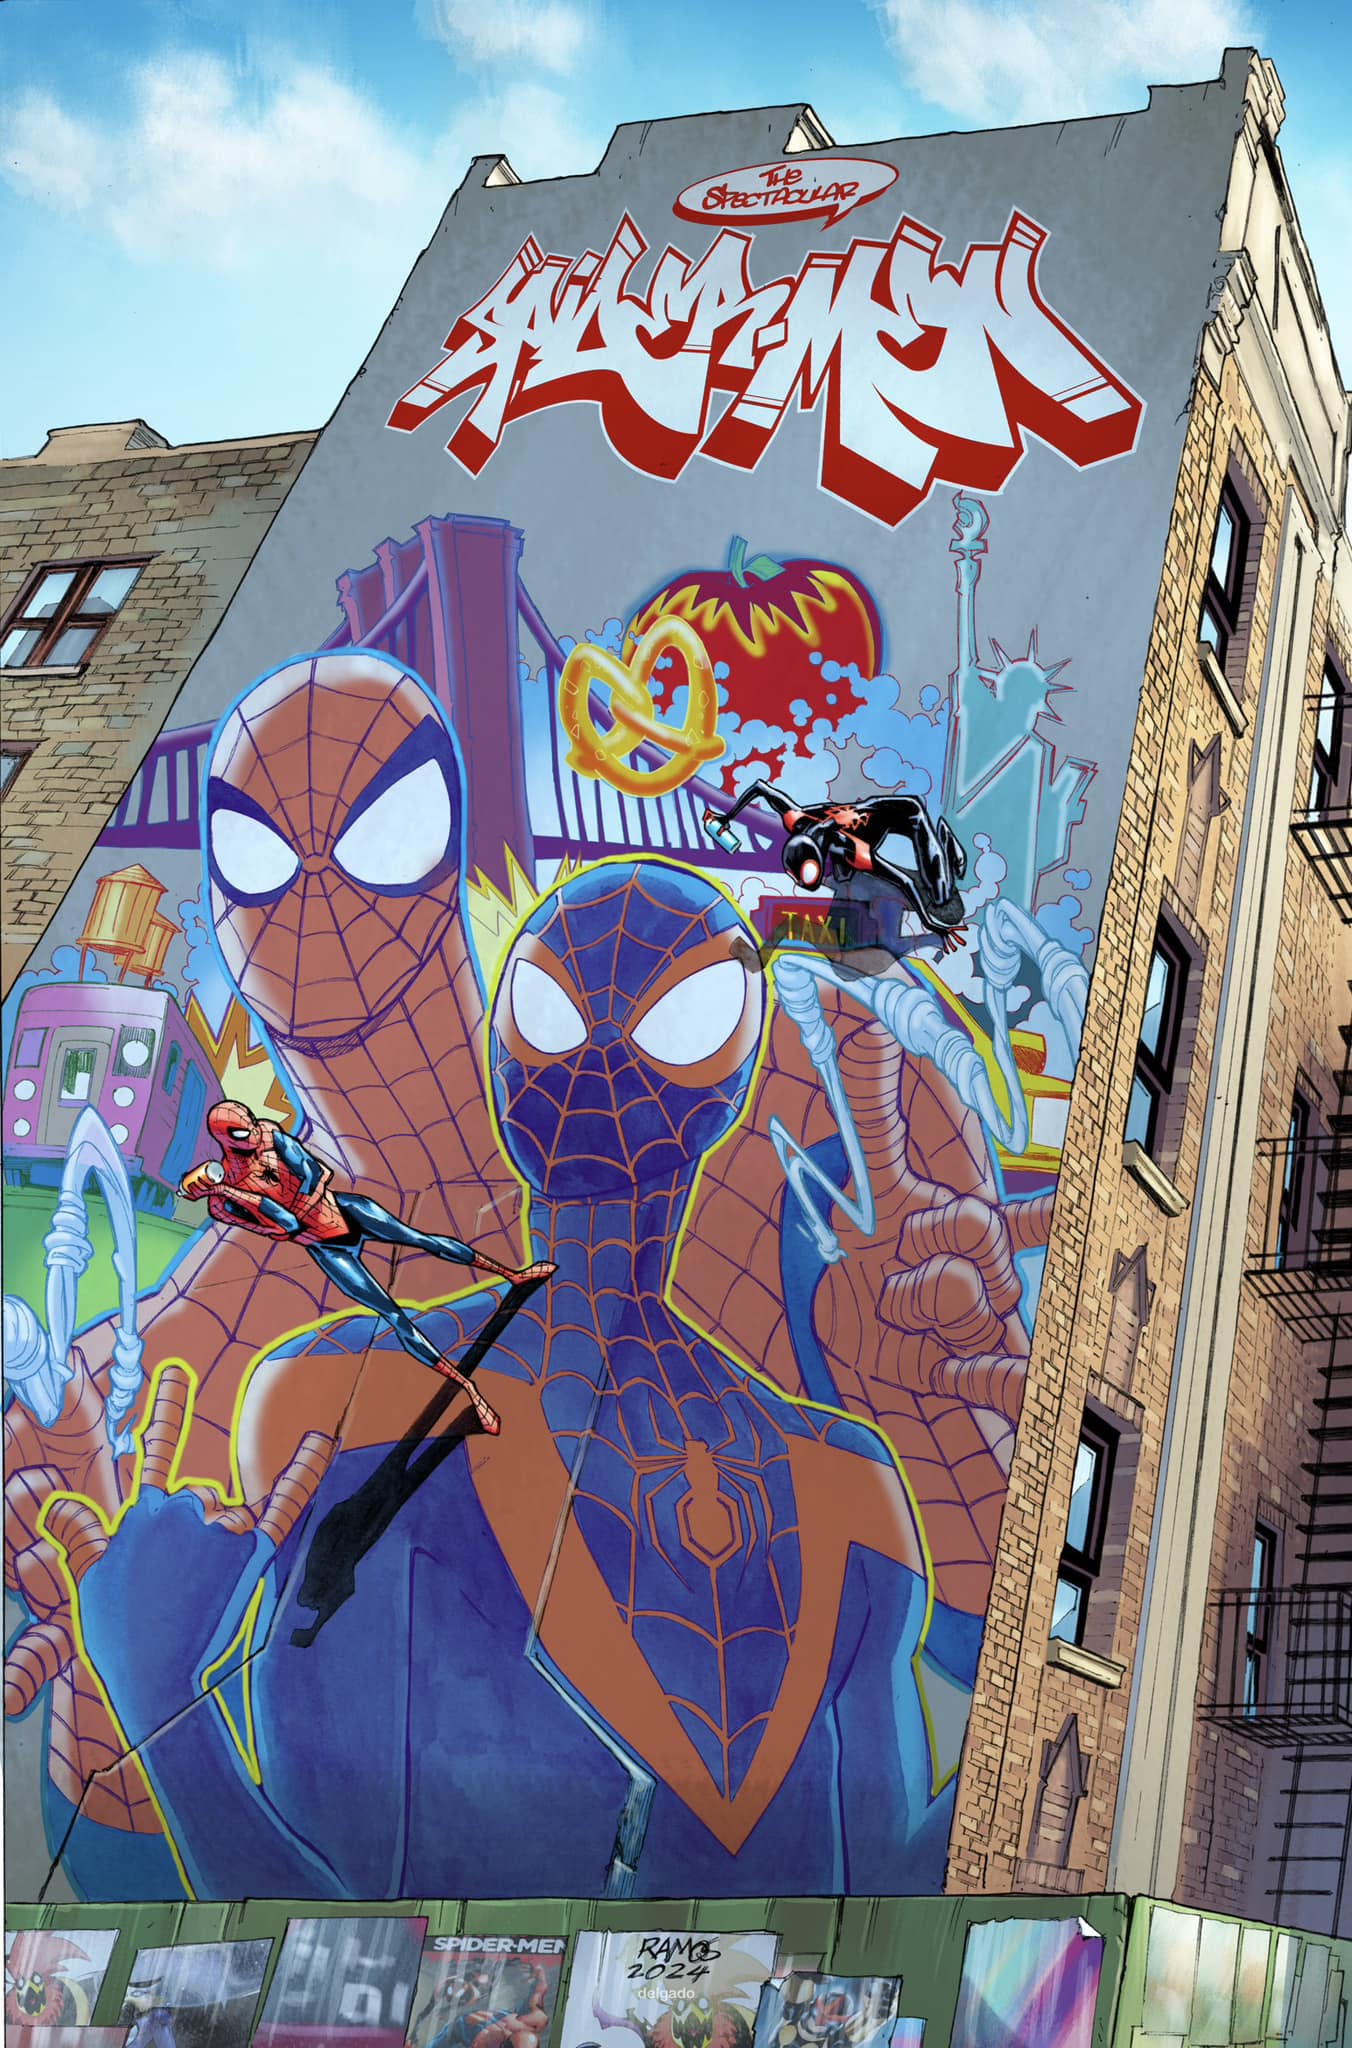 SPECTACULAR SPIDER-MEN #1 OFFICIAL RAMOS/TRINITY EXCLUSIVE GRAFFITI EDITION